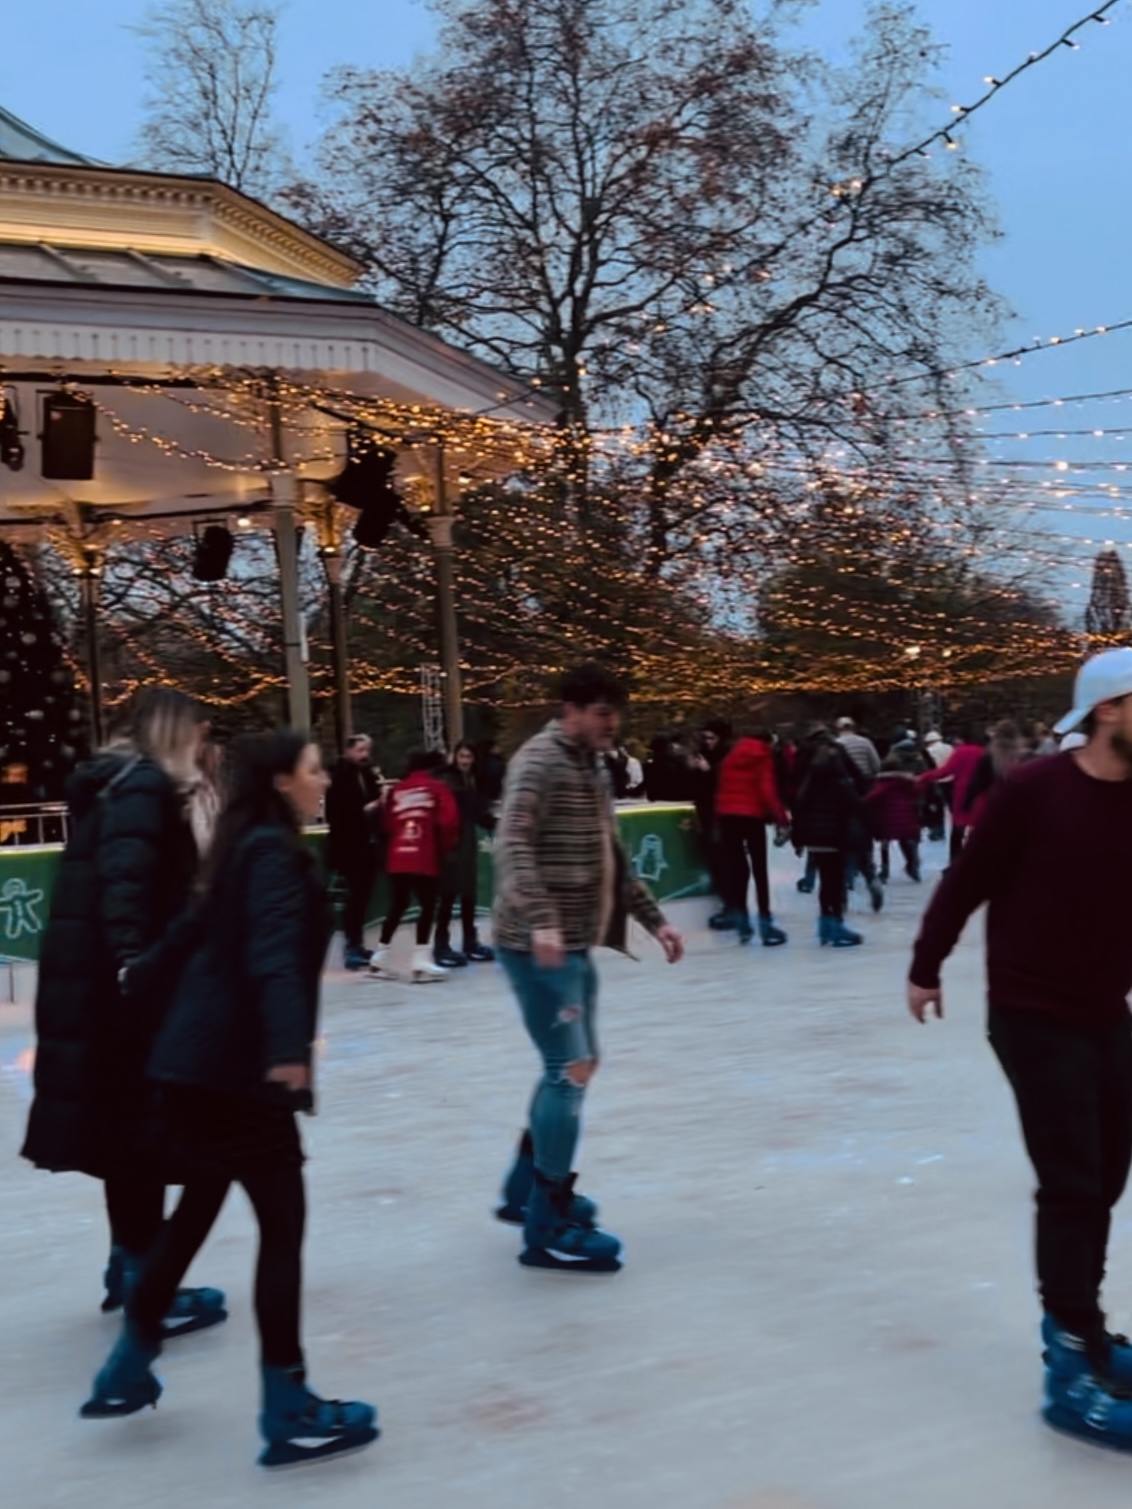 Hyde Park Winter Wonderland Ice Rink: Ice Skating in London at Christmas